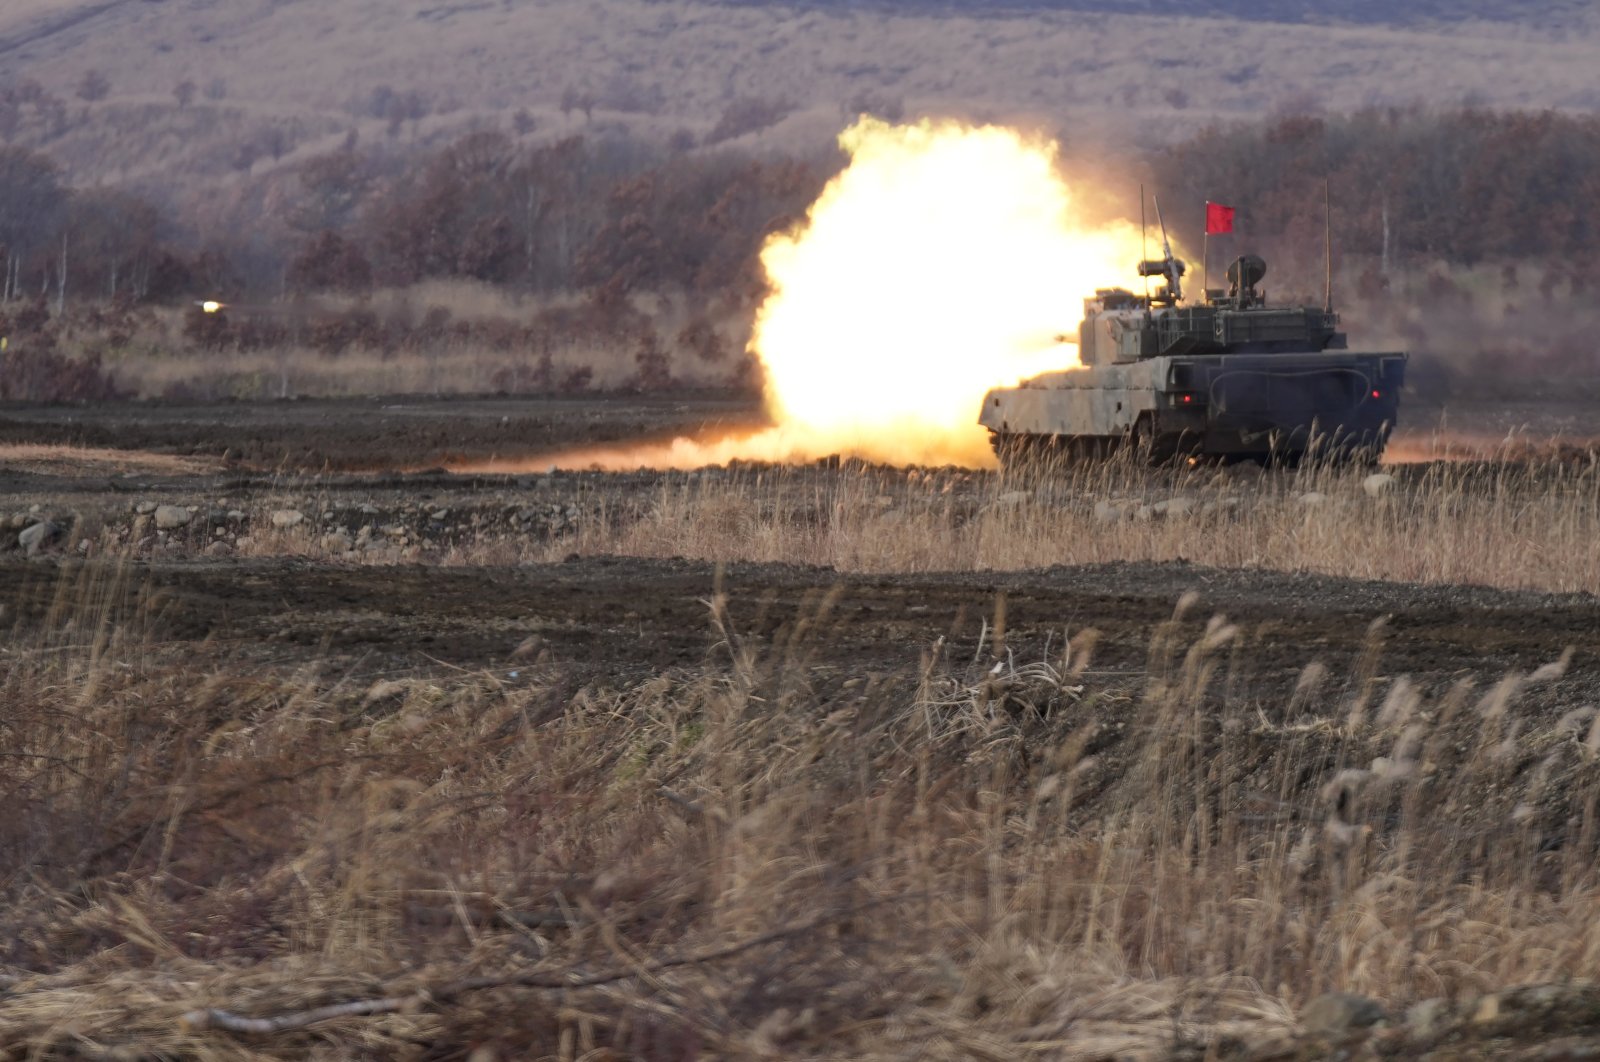 A Japanese Ground-Self Defense Force (JGDDF) Type 90 tank fires its gun at a target during the annual drill with live ammunitions exercise at Minami Eniwa Camp, in Eniwa, northern Japan island of Hokkaido, Dec. 6, 2021. (AP Photo) 